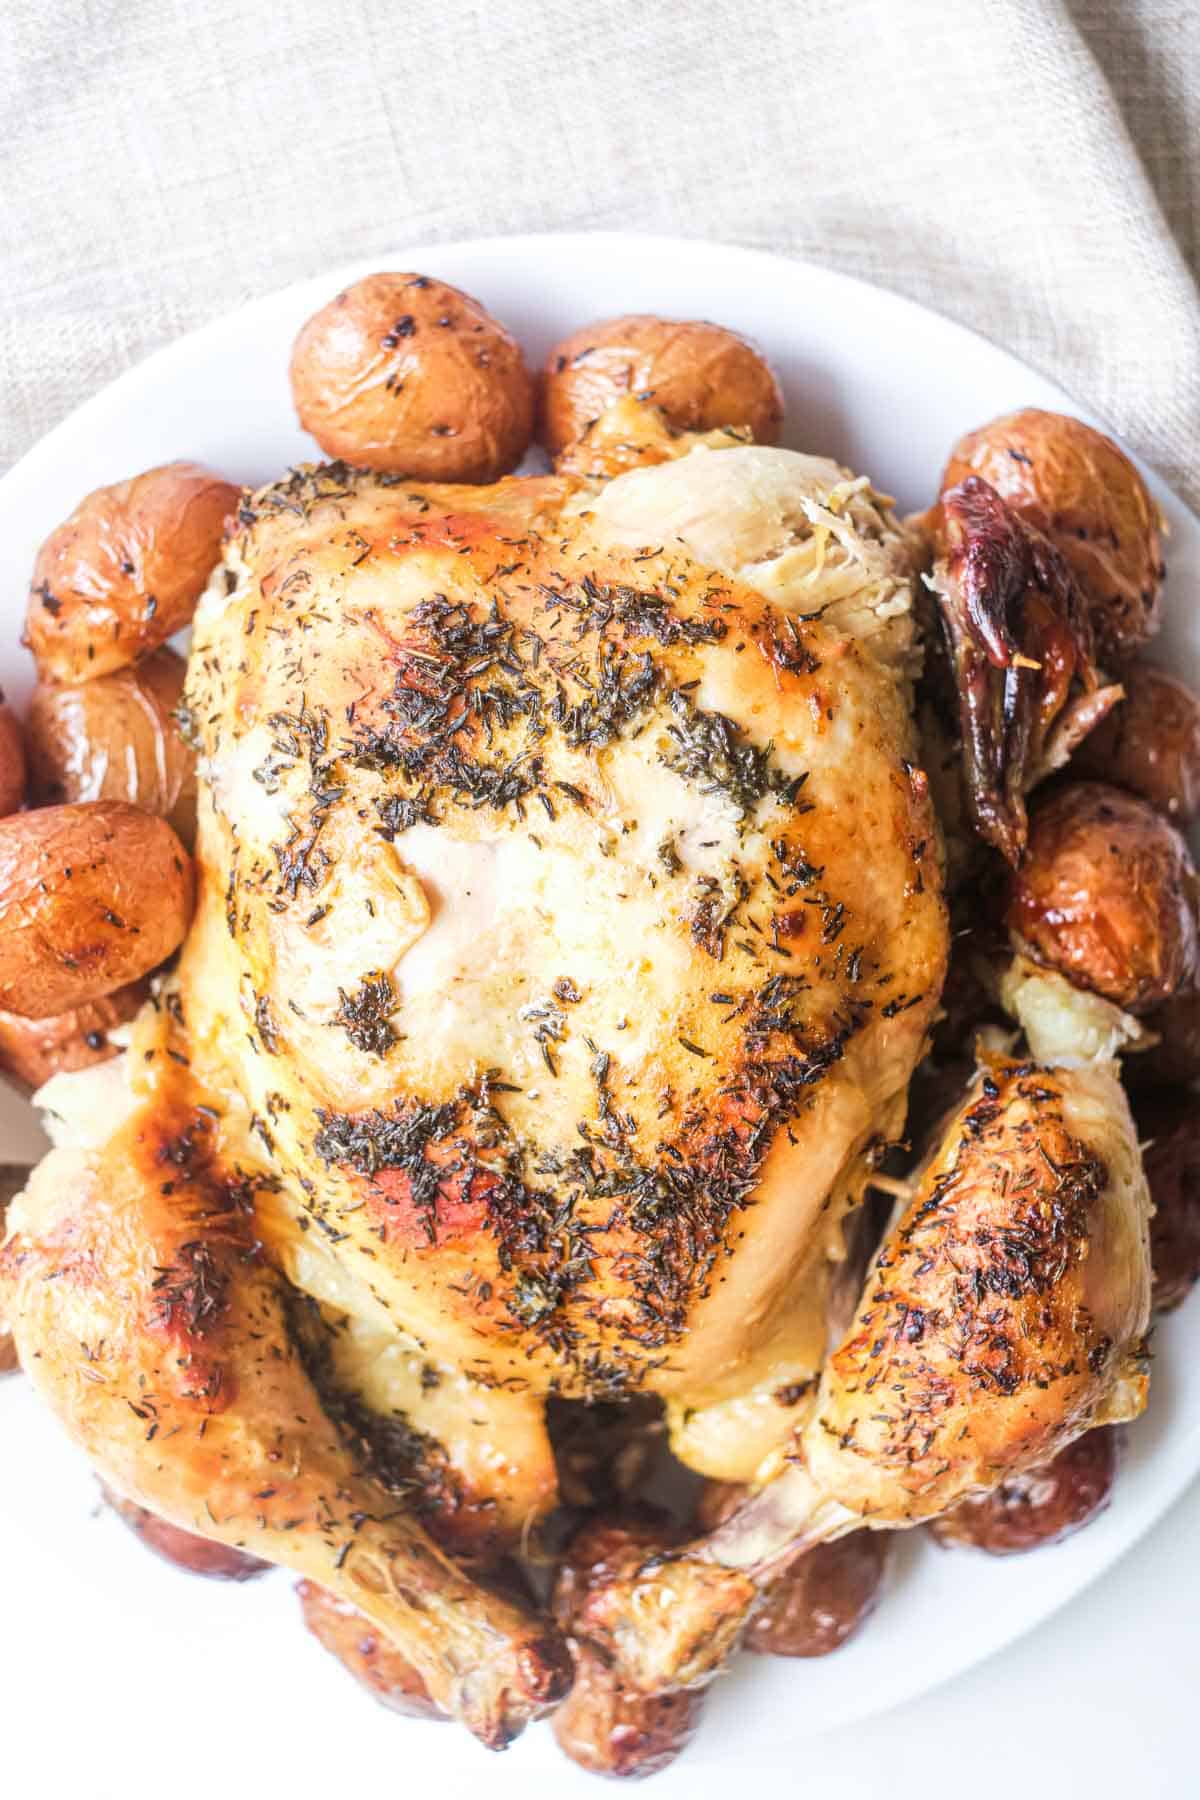 close up view of the finished dutch oven roast chicken and potatoes